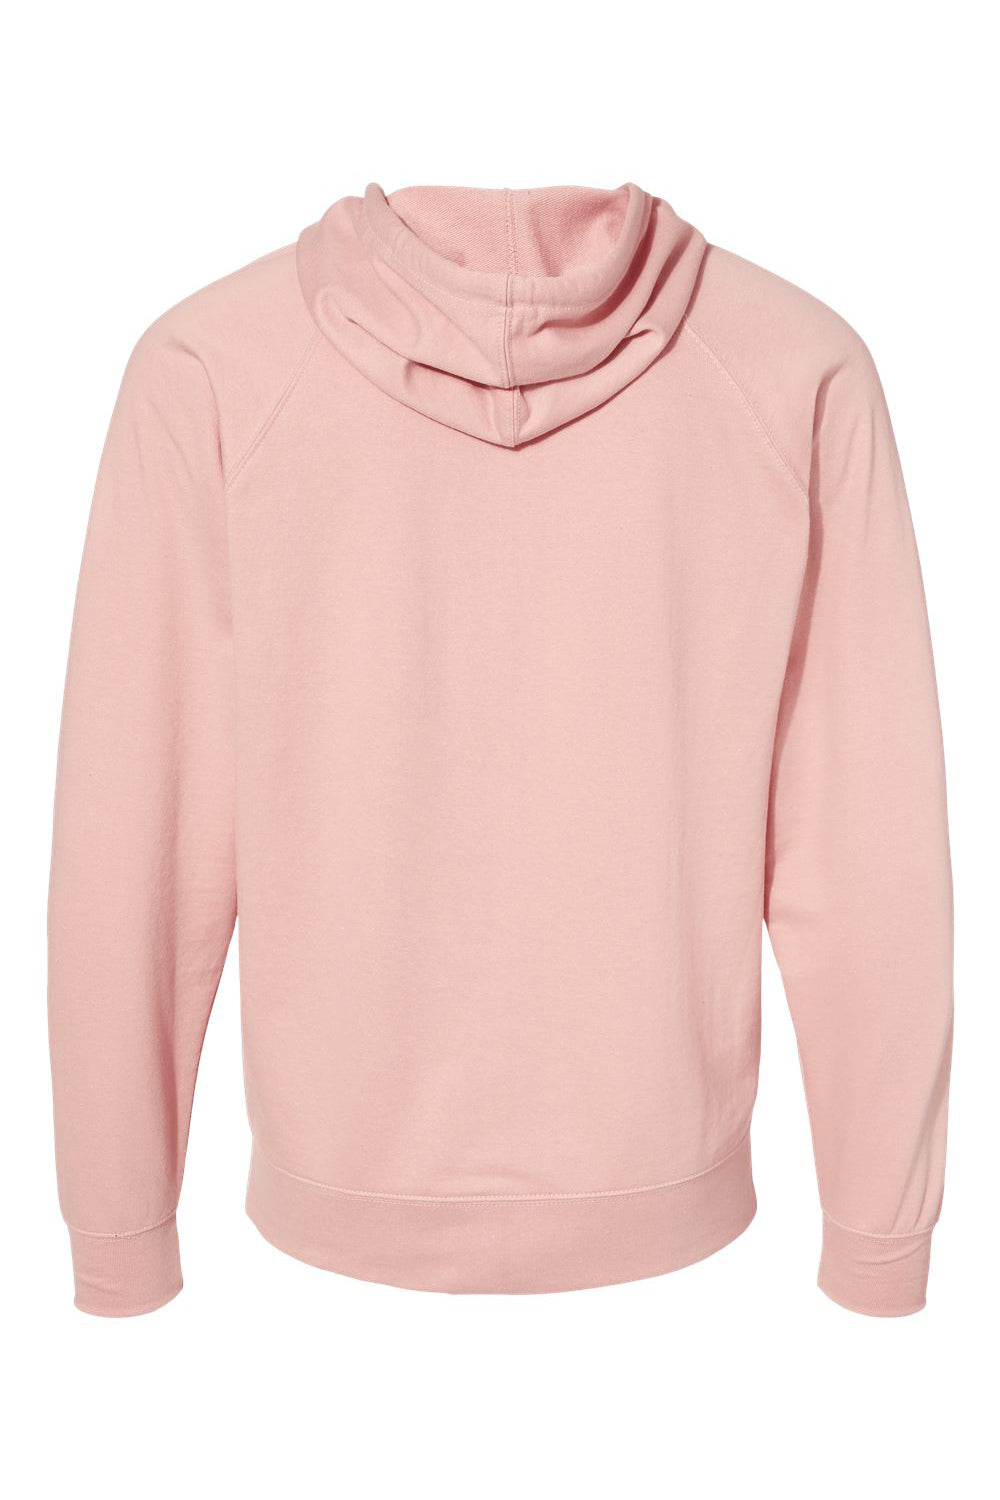 Independent Trading Co. SS1000Z Mens Icon Loopback Terry Full Zip Hooded Sweatshirt Hoodie Rose Pink Flat Back